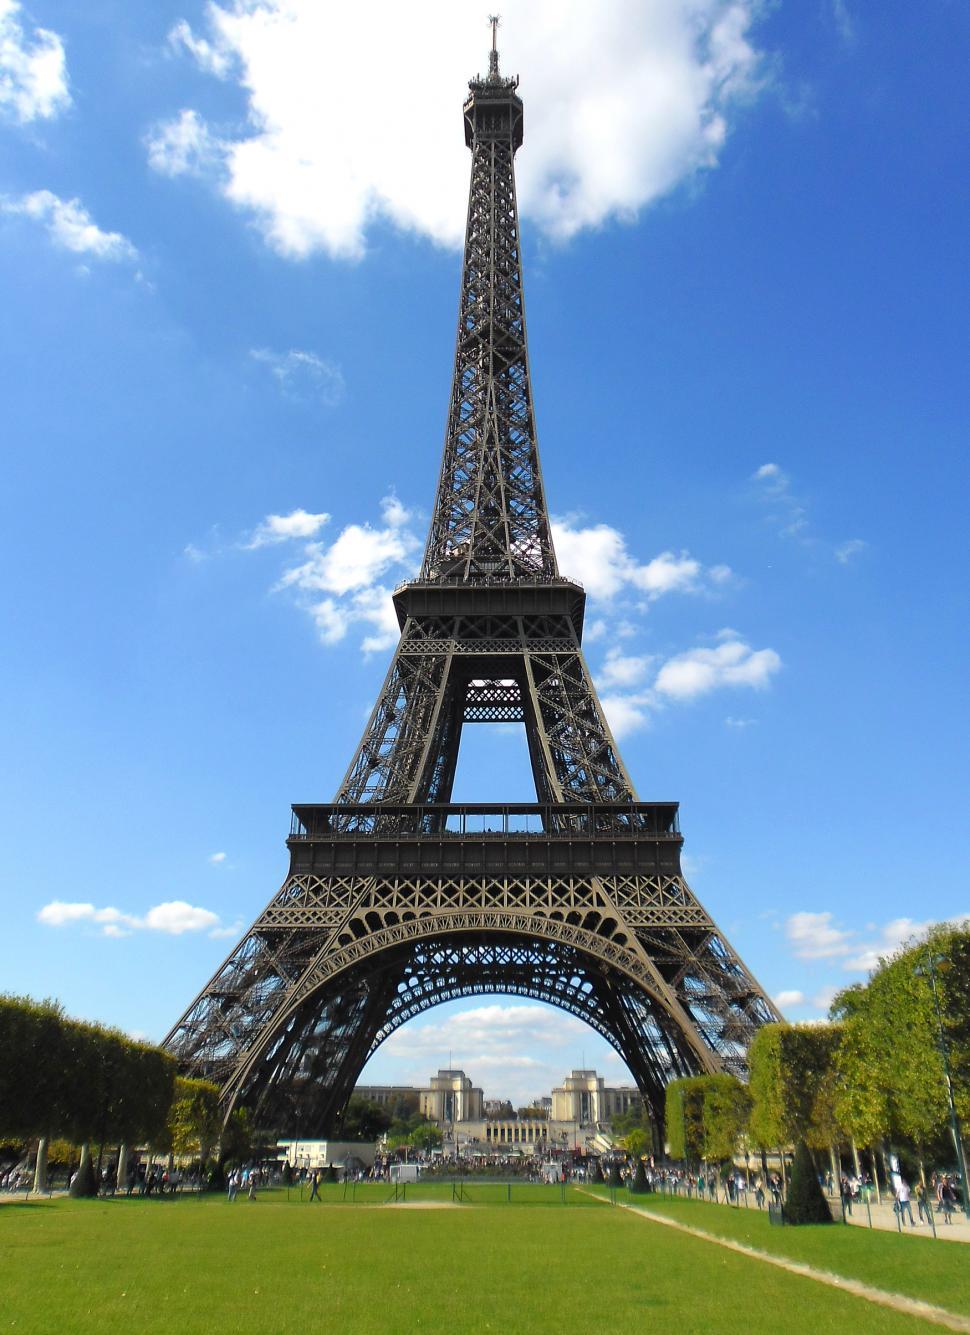 Free Image of The Eiffel Tower in Paris - France 